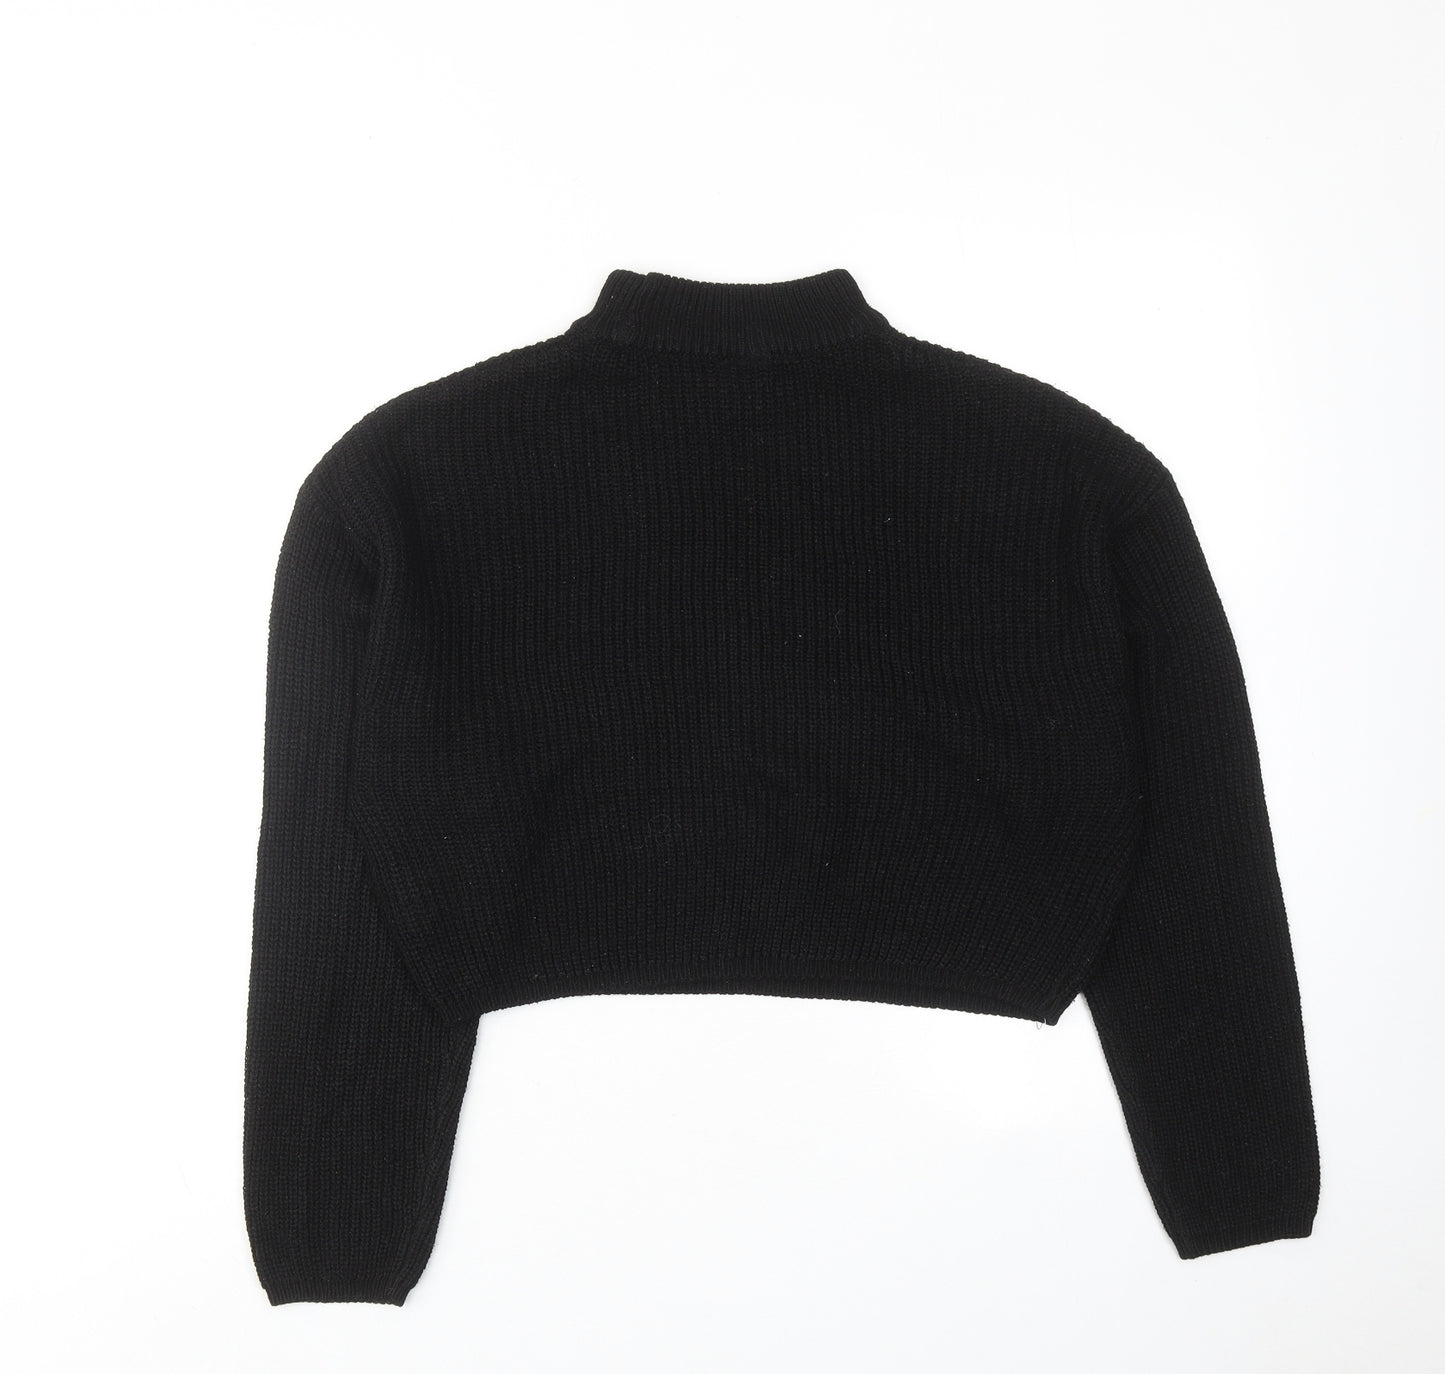 H&M Womens Black Roll Neck Acrylic Pullover Jumper Size S